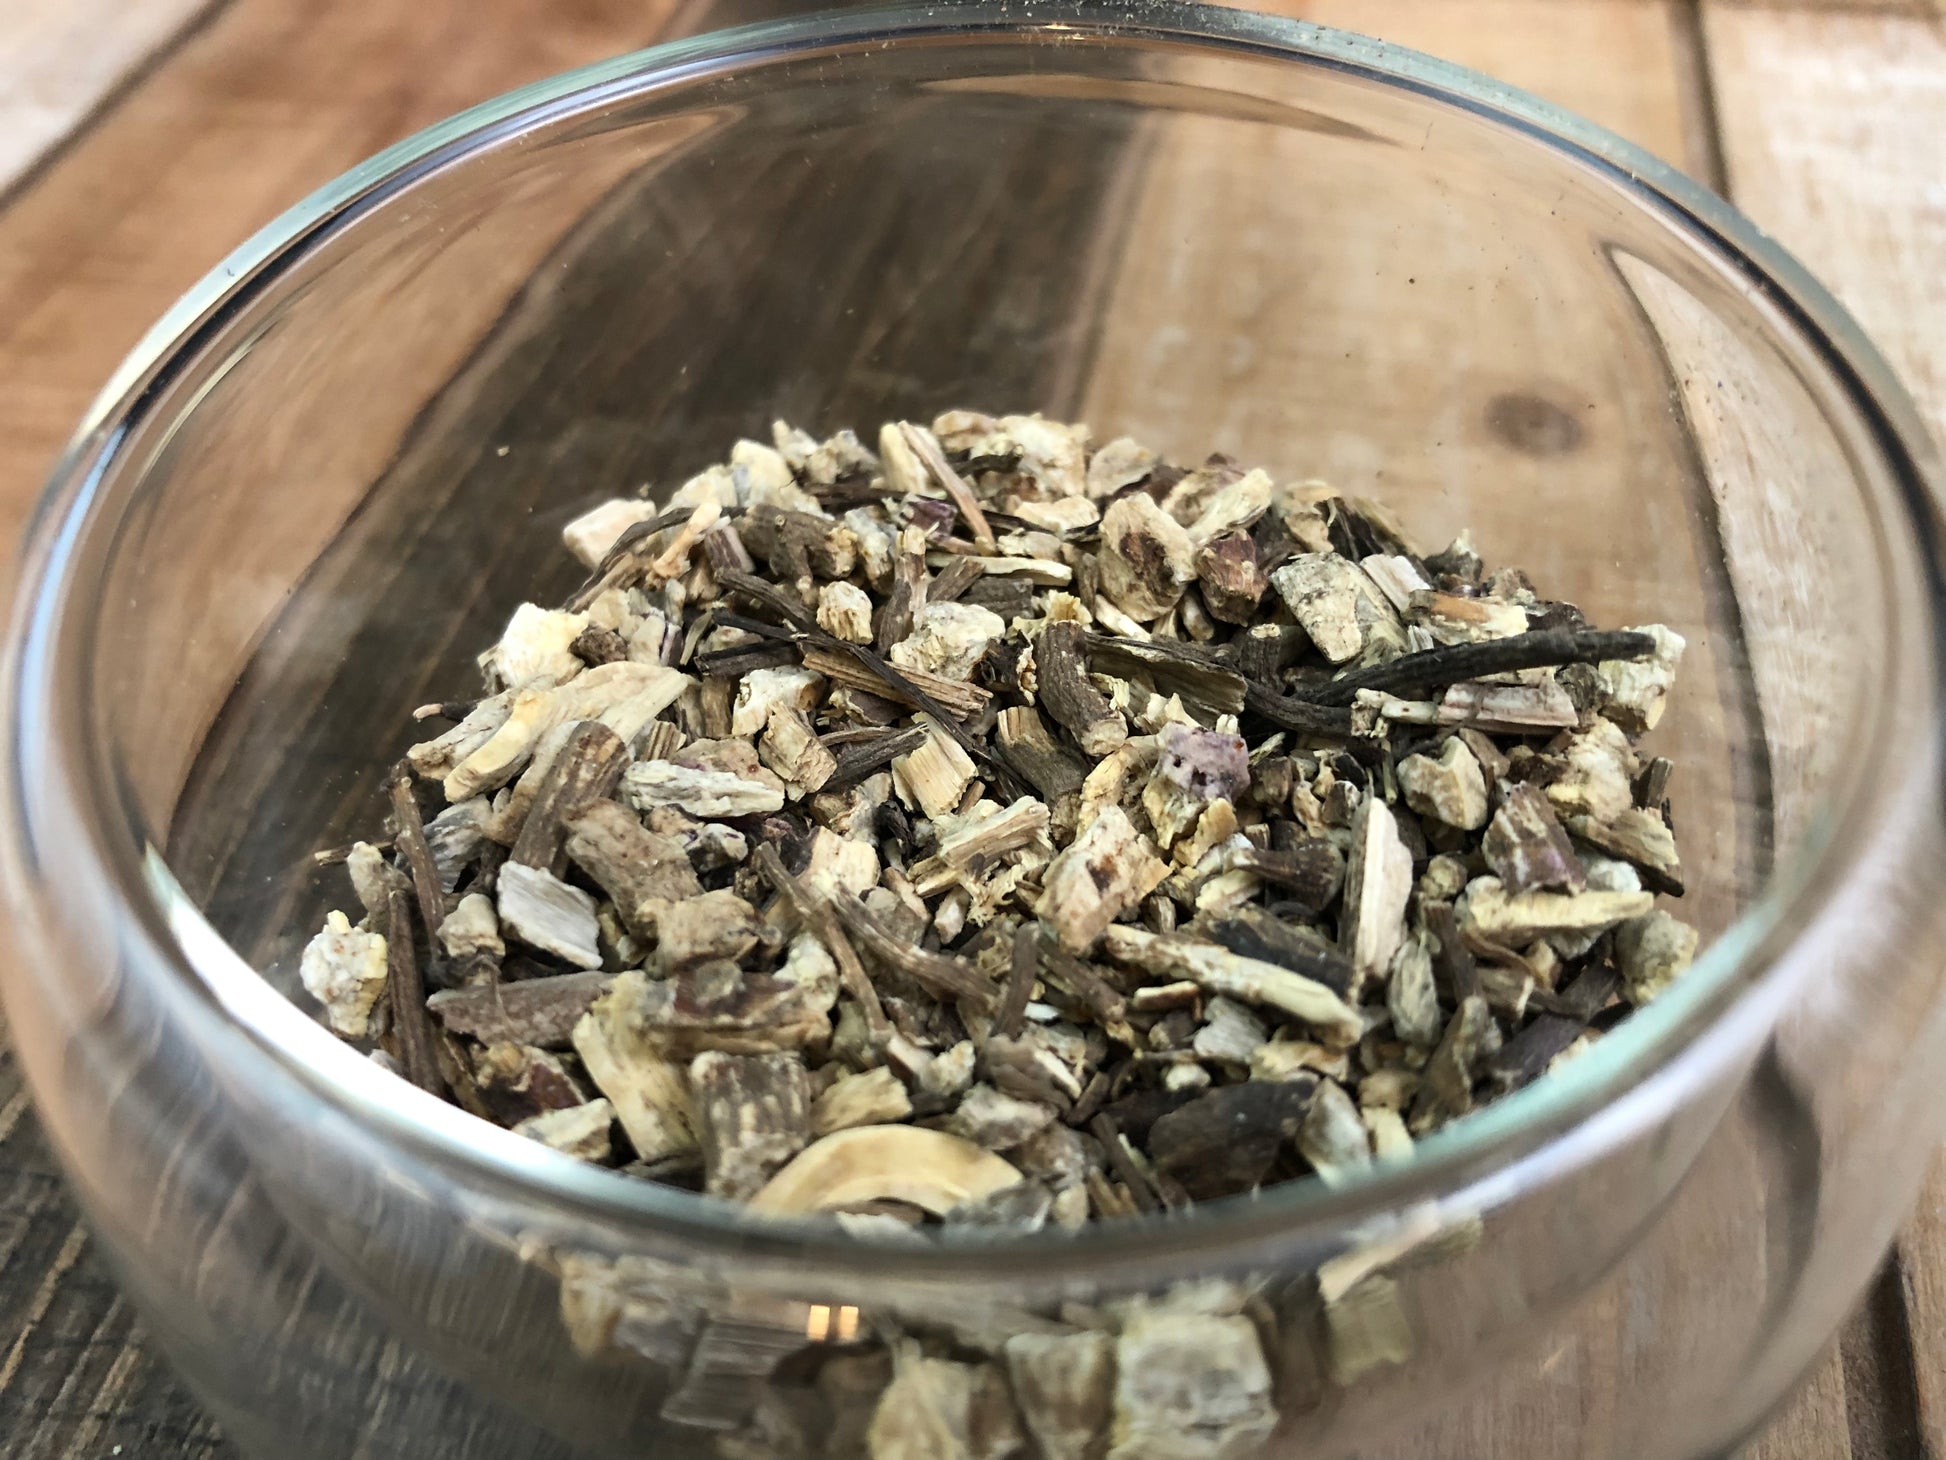 upclose image of dried echinacea in a clear glass cup with a wooden table as background